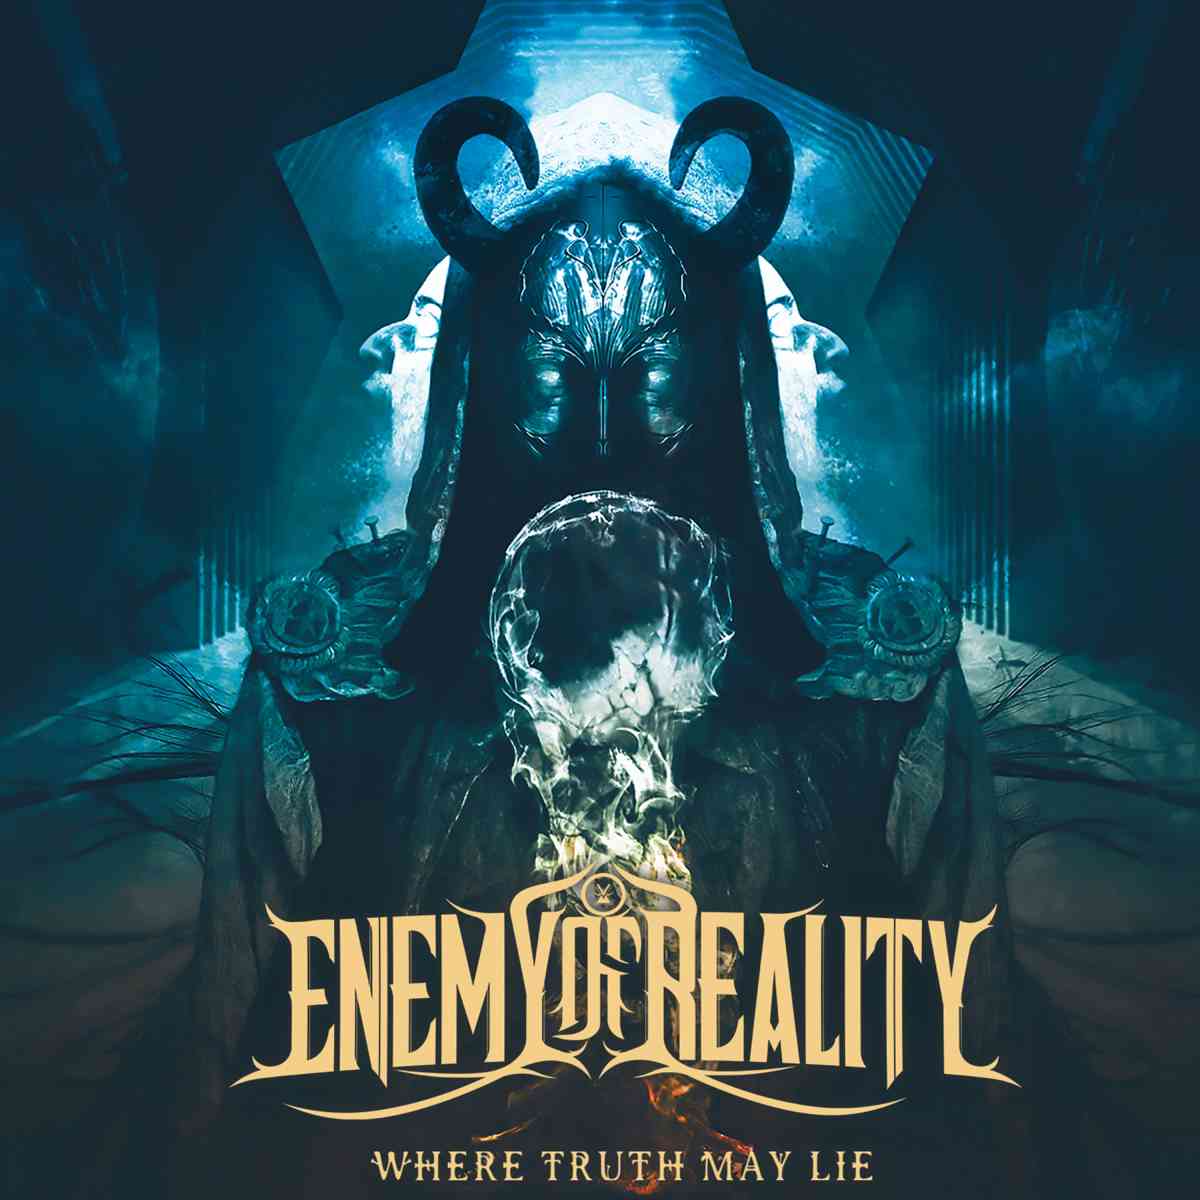 ENEMY OF REALITY - Where Truth May Lie - album cover